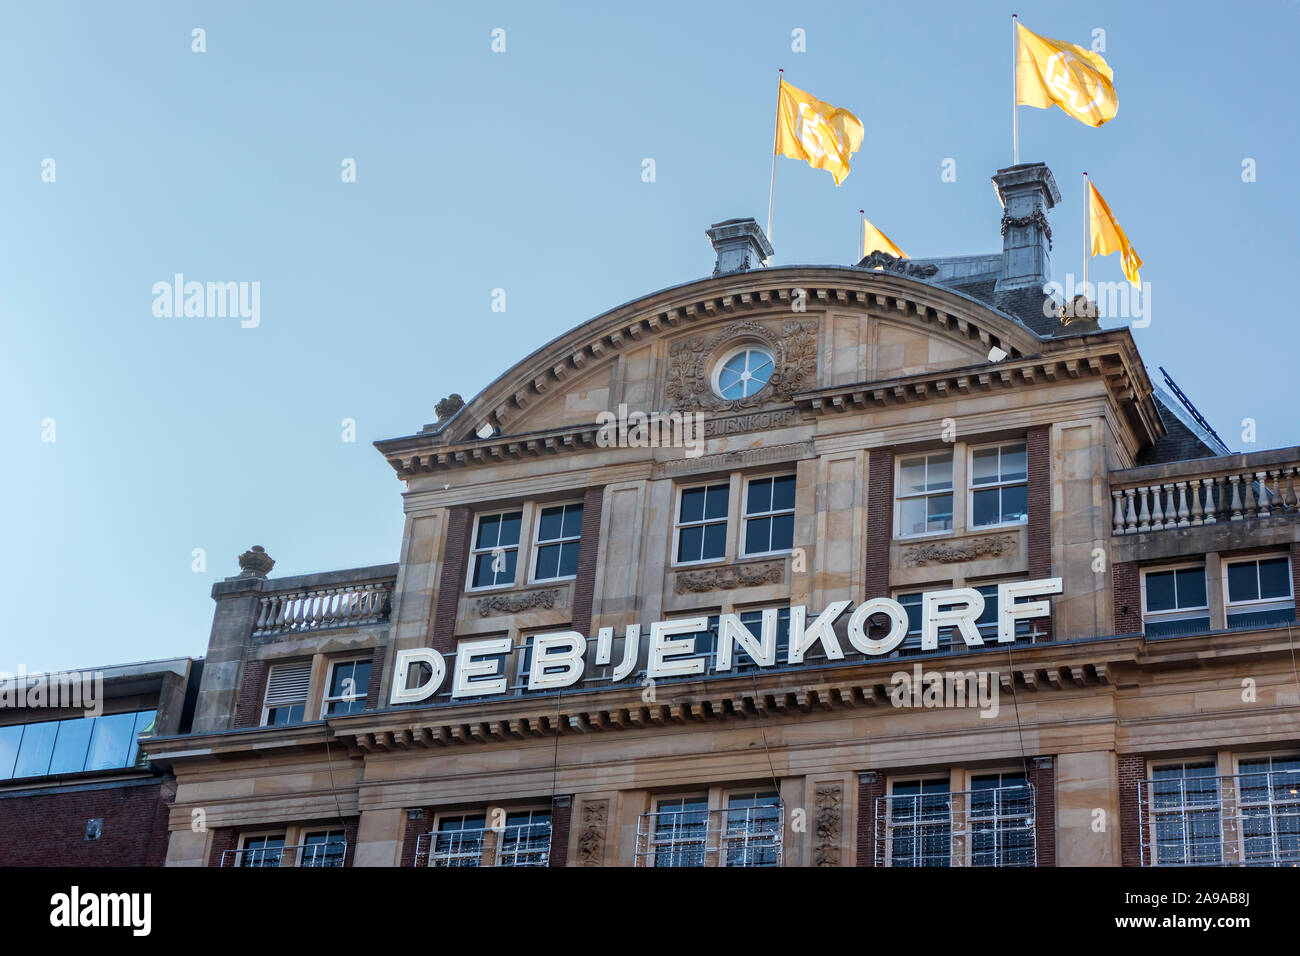 Amsterdam, Holland - October 30, 2019: Sign of the Bijenkorf, the flagship store on Dam Square from the high-end department stores in the Netherlands Stock Photo